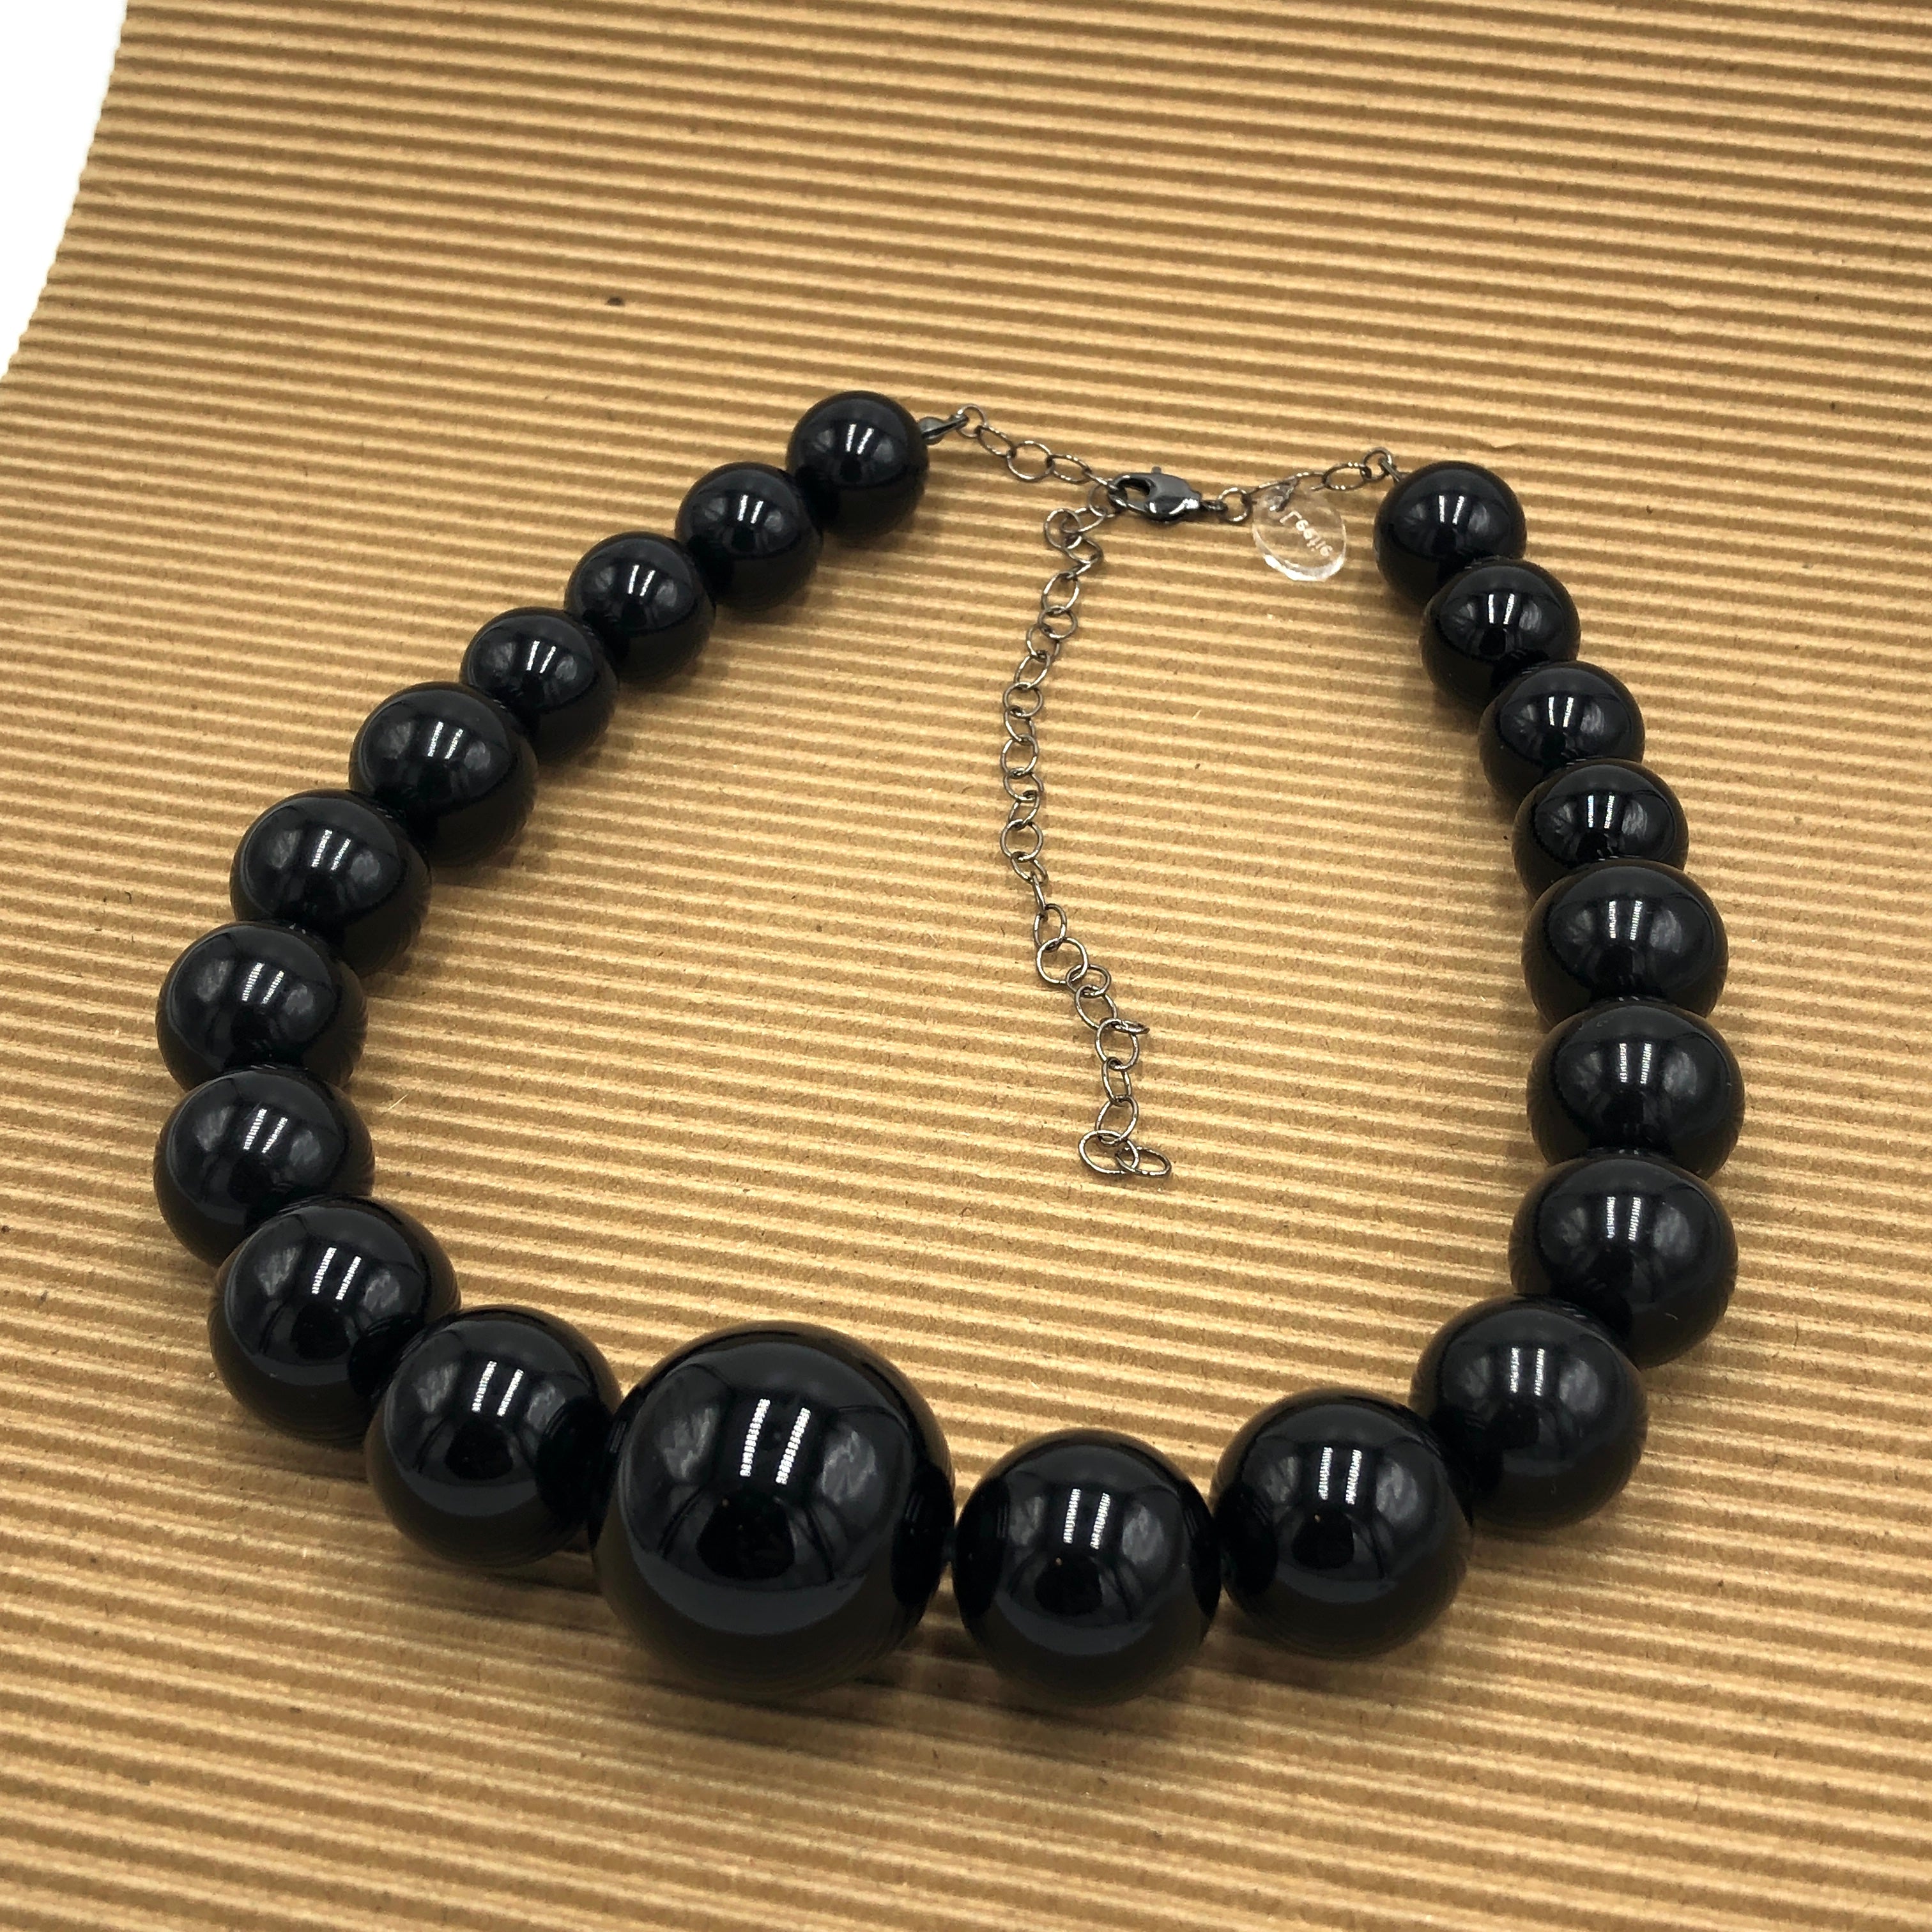 Chunky Graduated Black Necklace